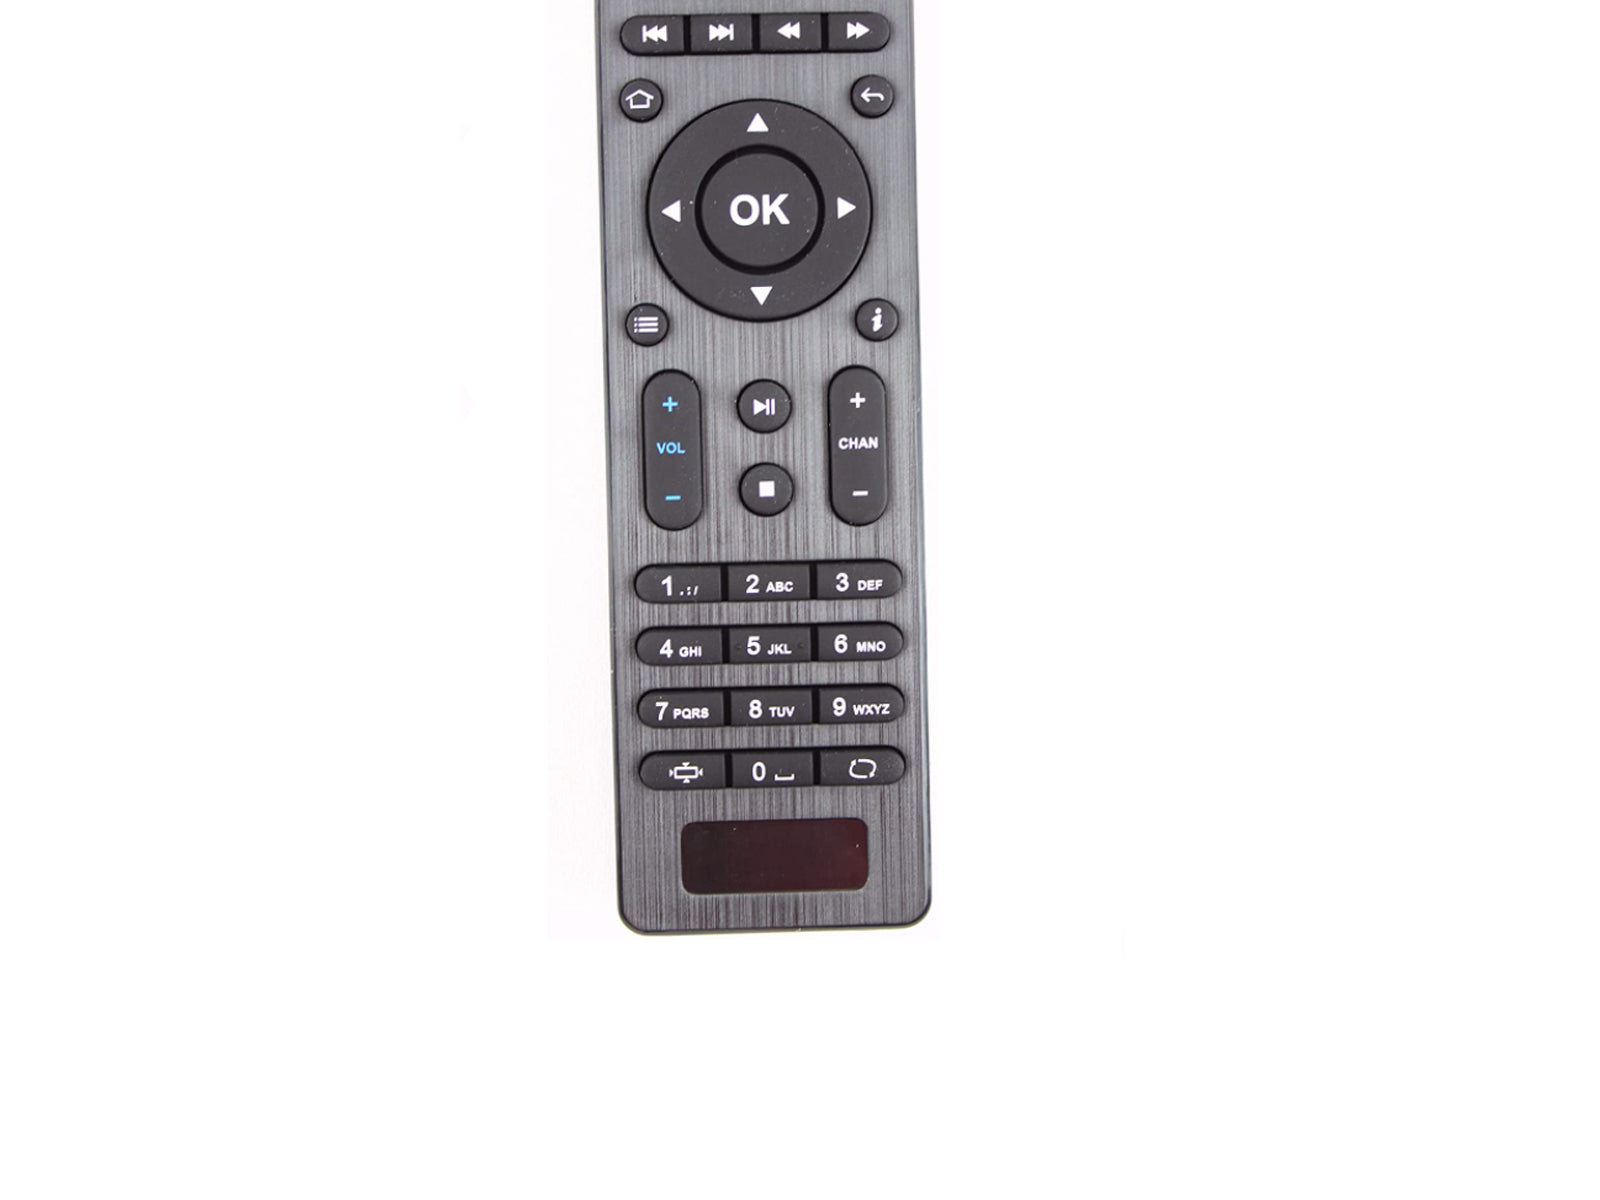 Replacement Remote Control for IPTV Box With Variety of MAG Box's Synergy Tech Int